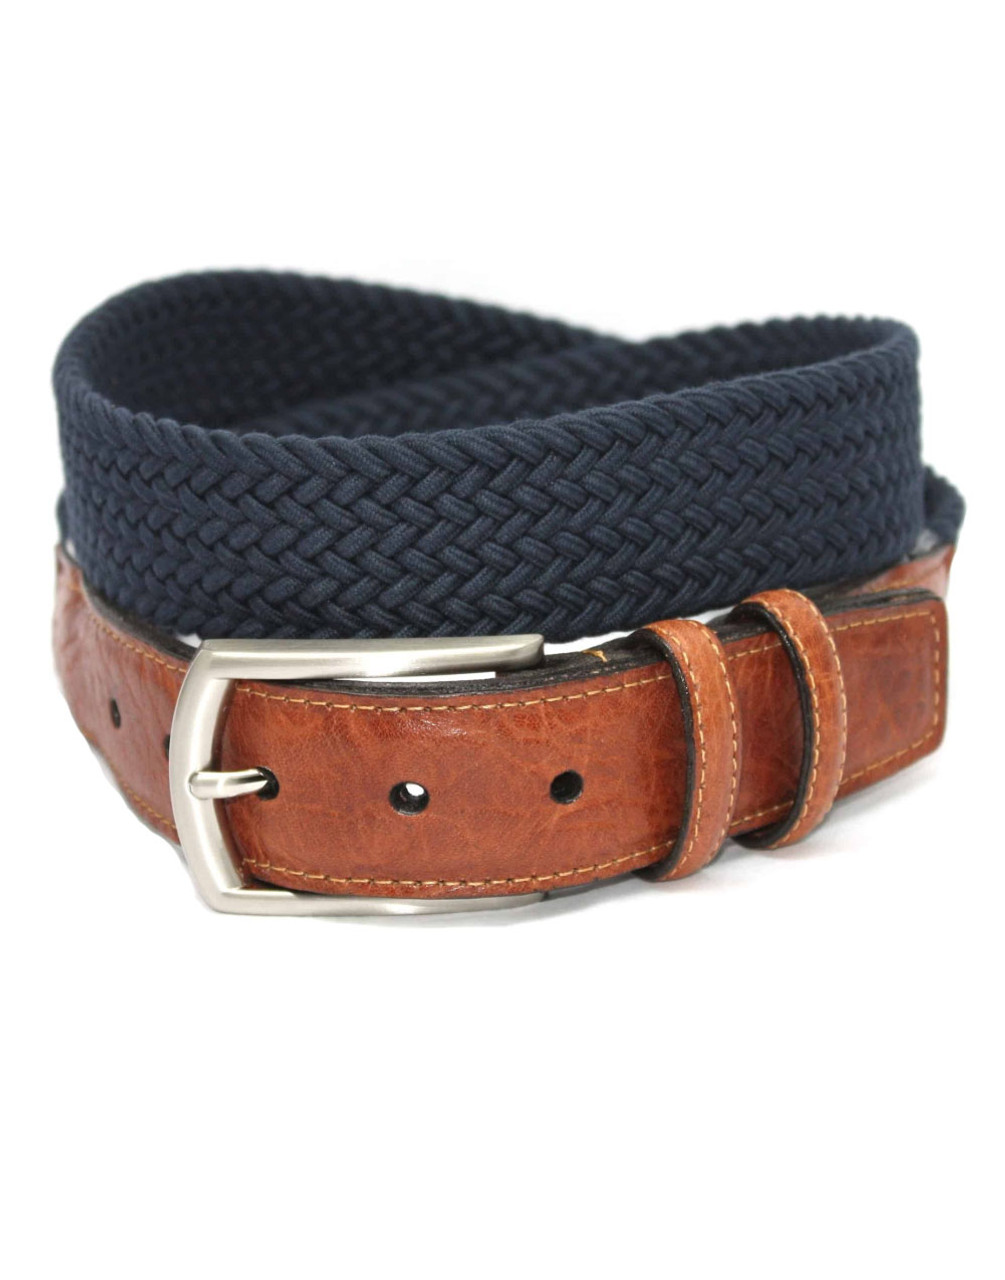 Italian Woven Cotton Stretch Belt by Torino Leather - Navy